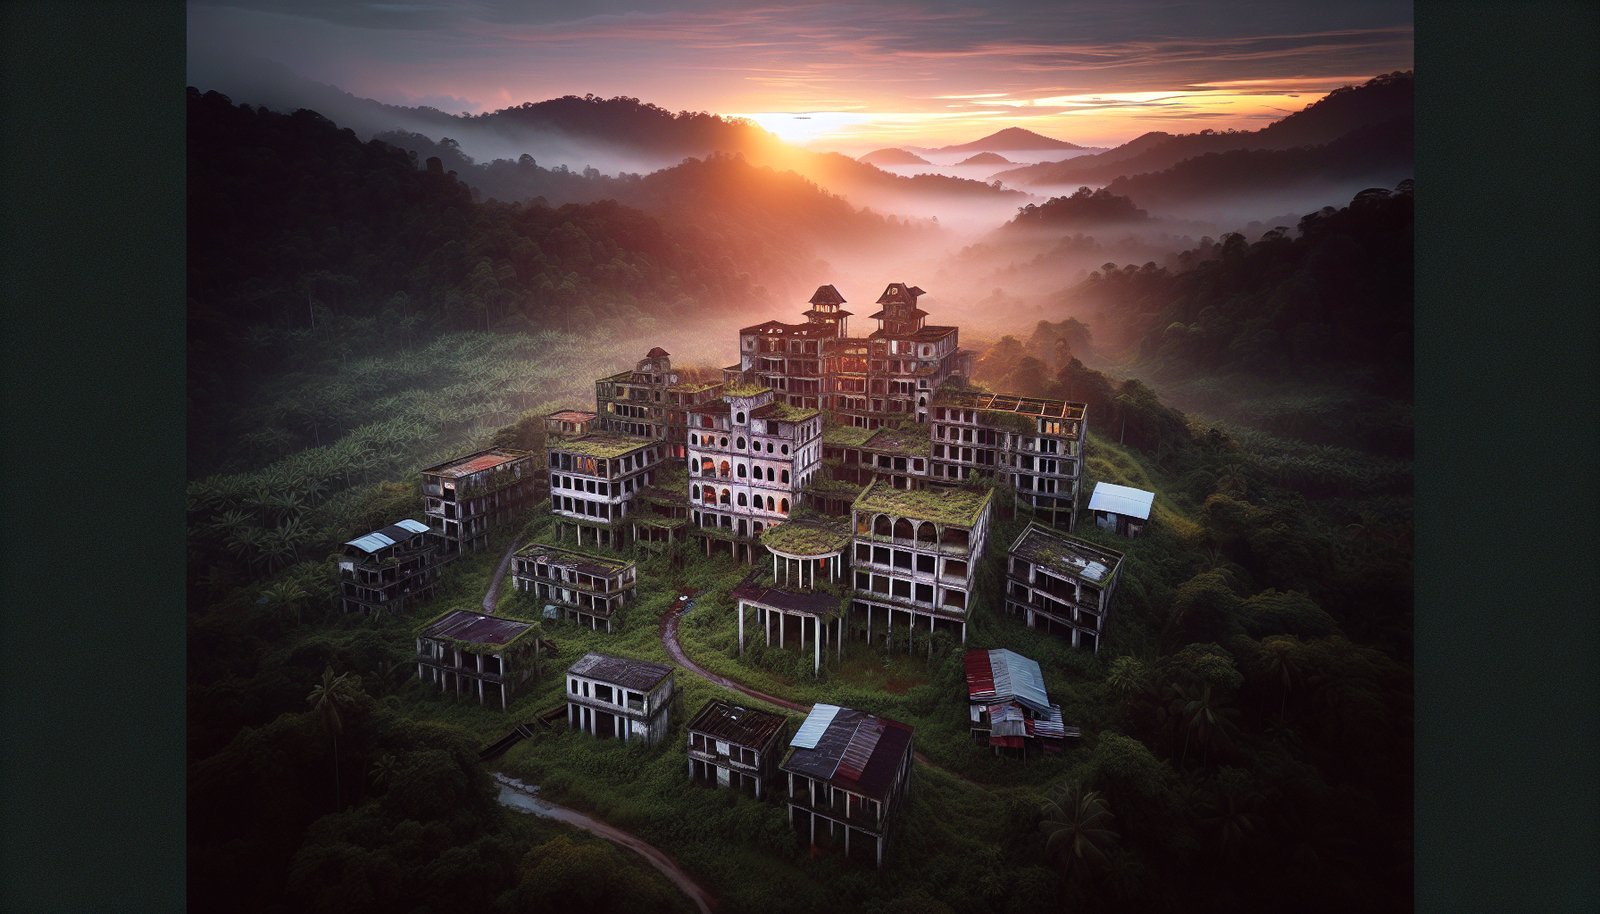 explore the mystery of malaysia's $100 billion ghost town and its potential as a top netflix filming location.